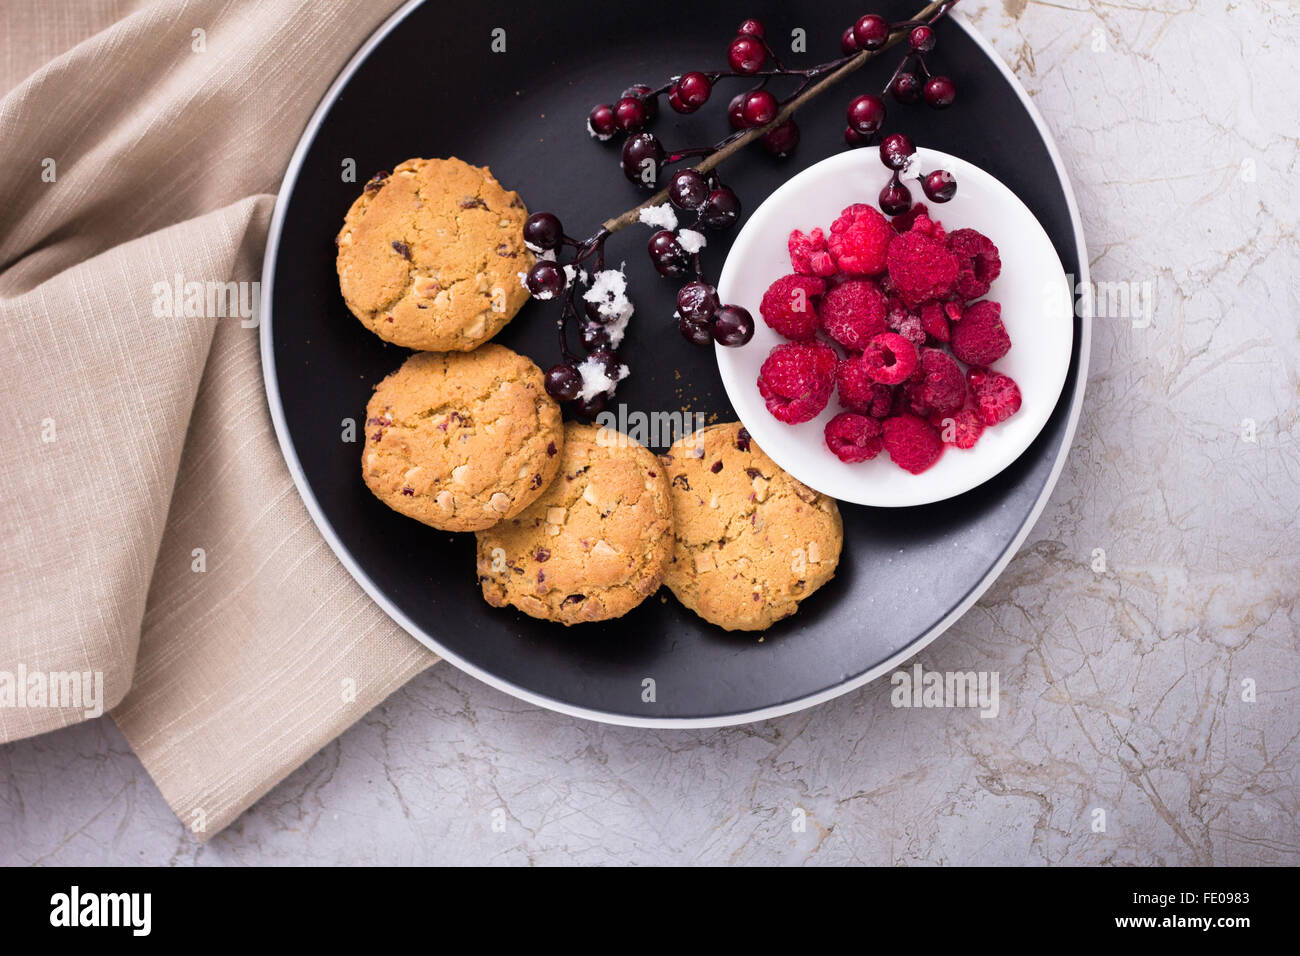 American Style White Chocolate Chip Cookie ob black plate served with Raspberries on marble Surface, cookies with Cranberries Stock Photo